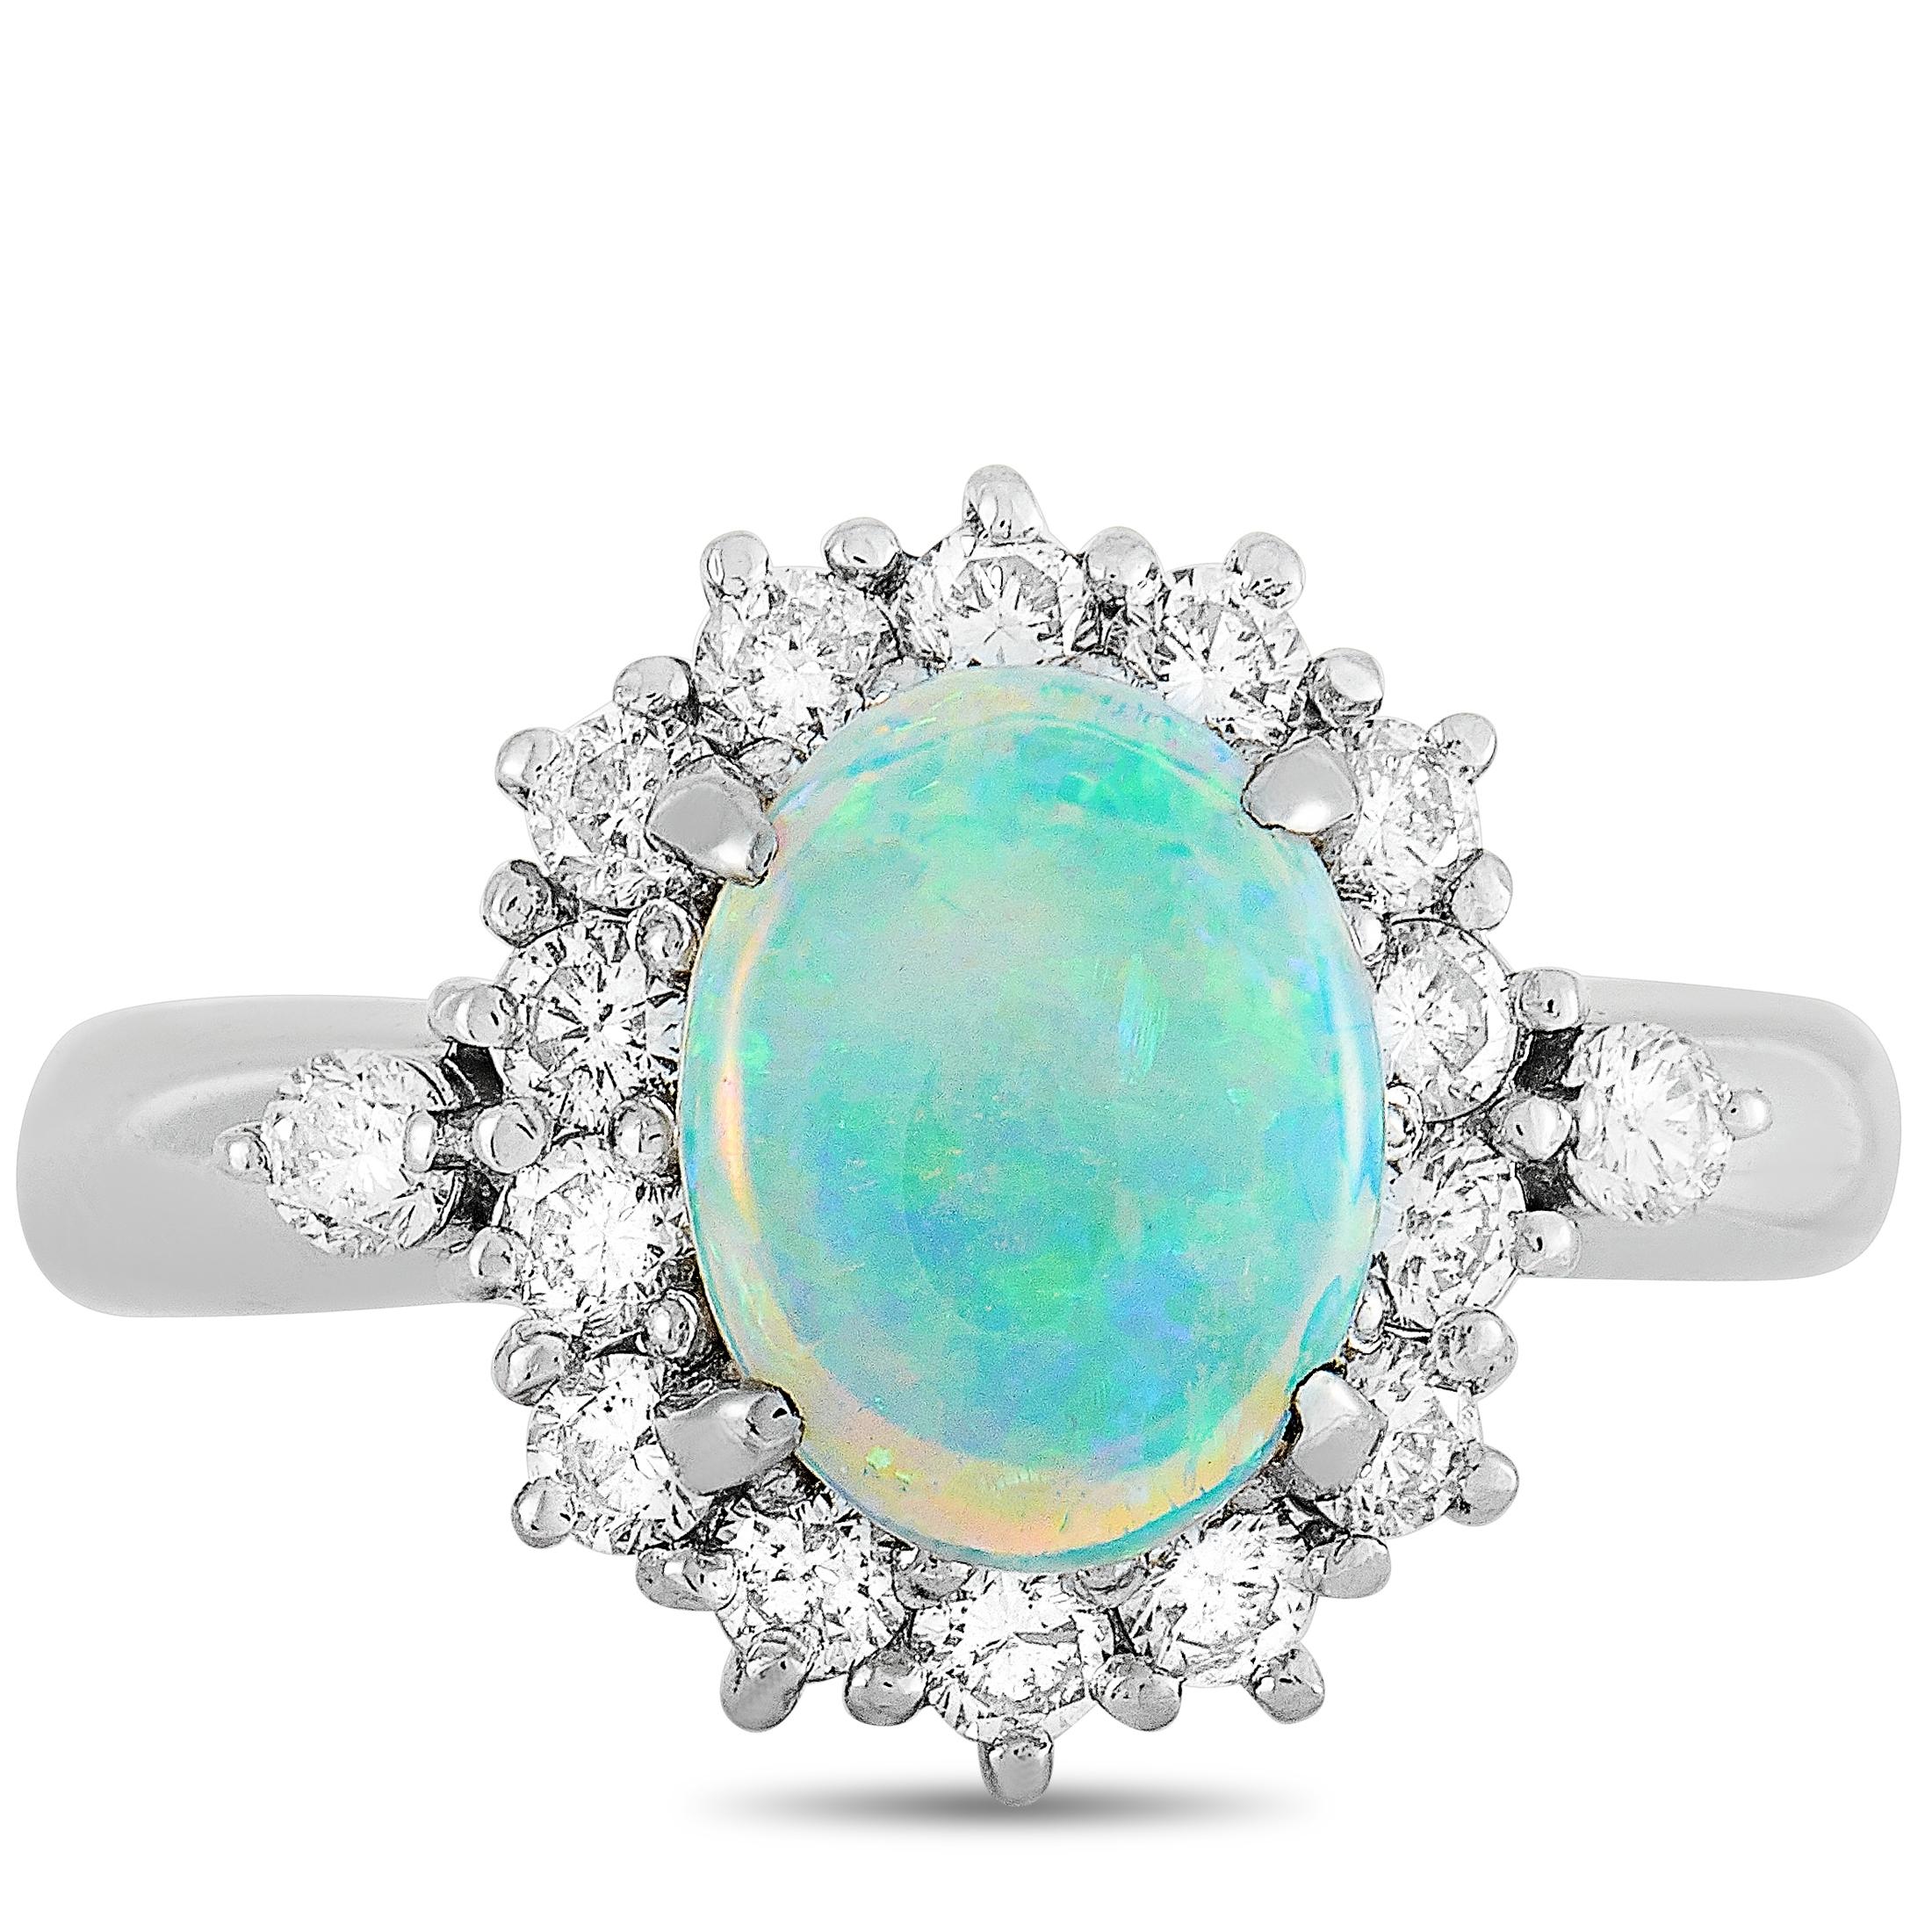 LB Exclusive Platinum 0.57 Carat Diamond and Opal Oval Ring 1